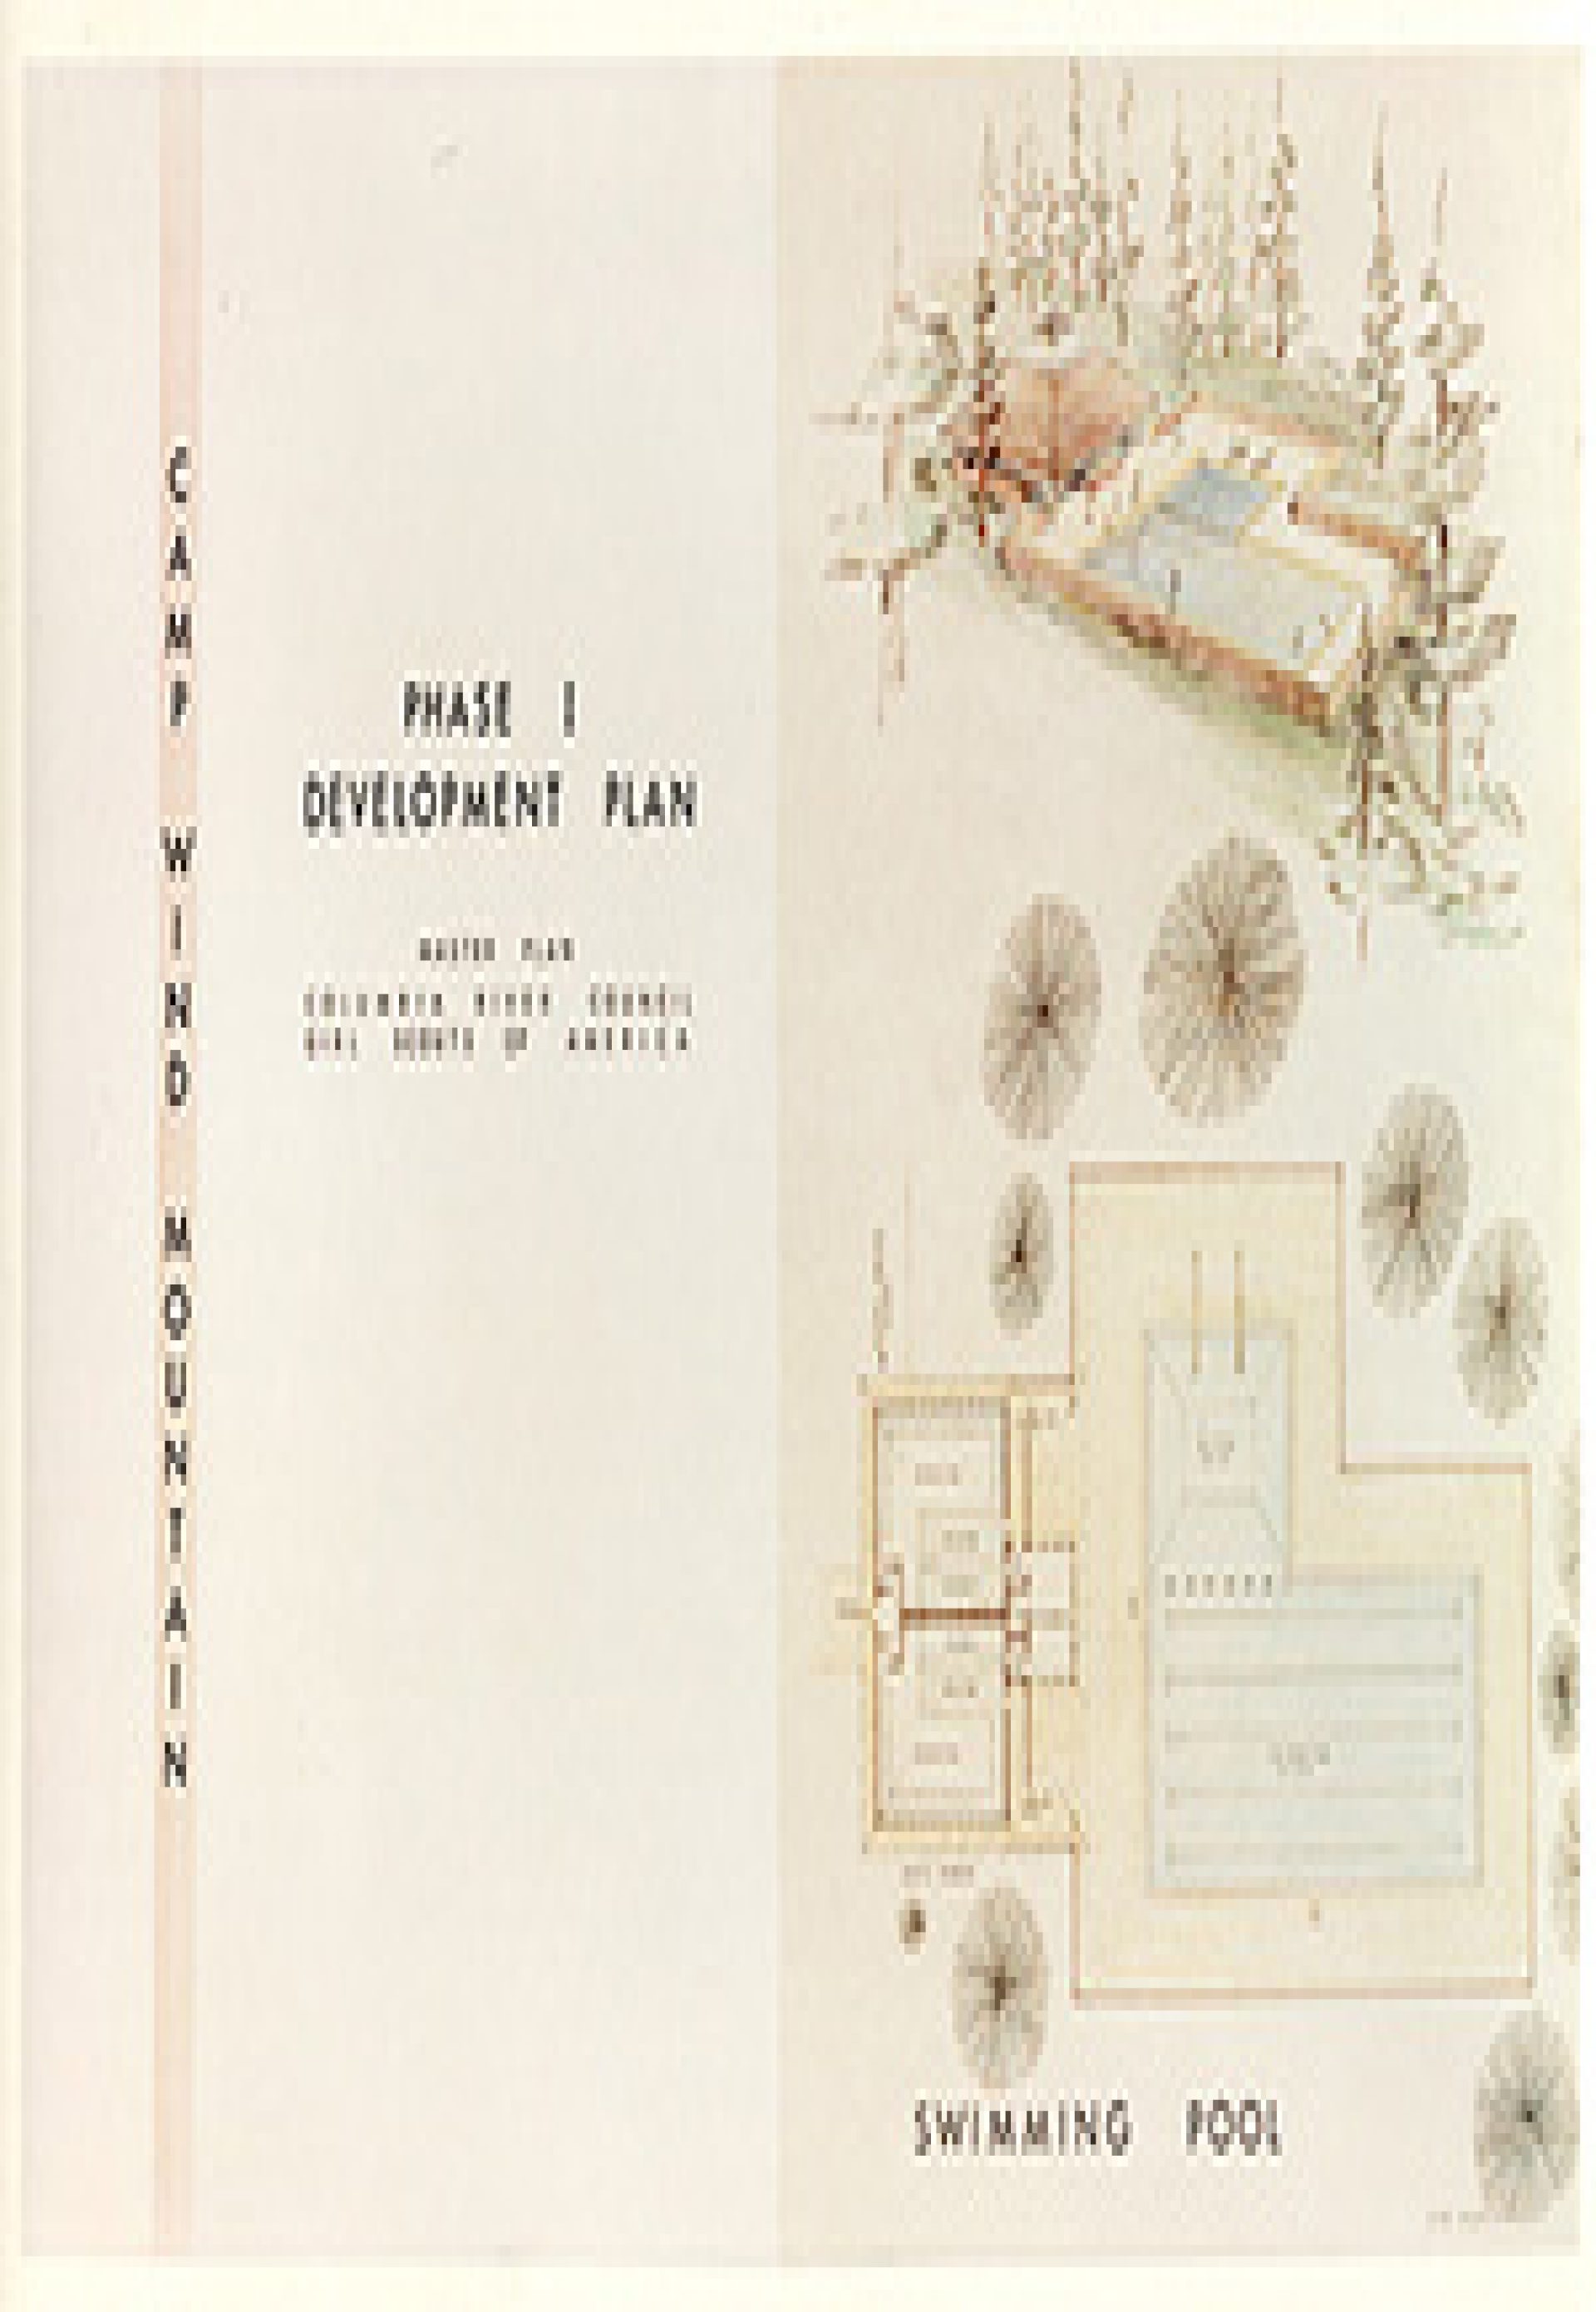 An illustration of a plan for a swimming pool at Camp Arrowhead